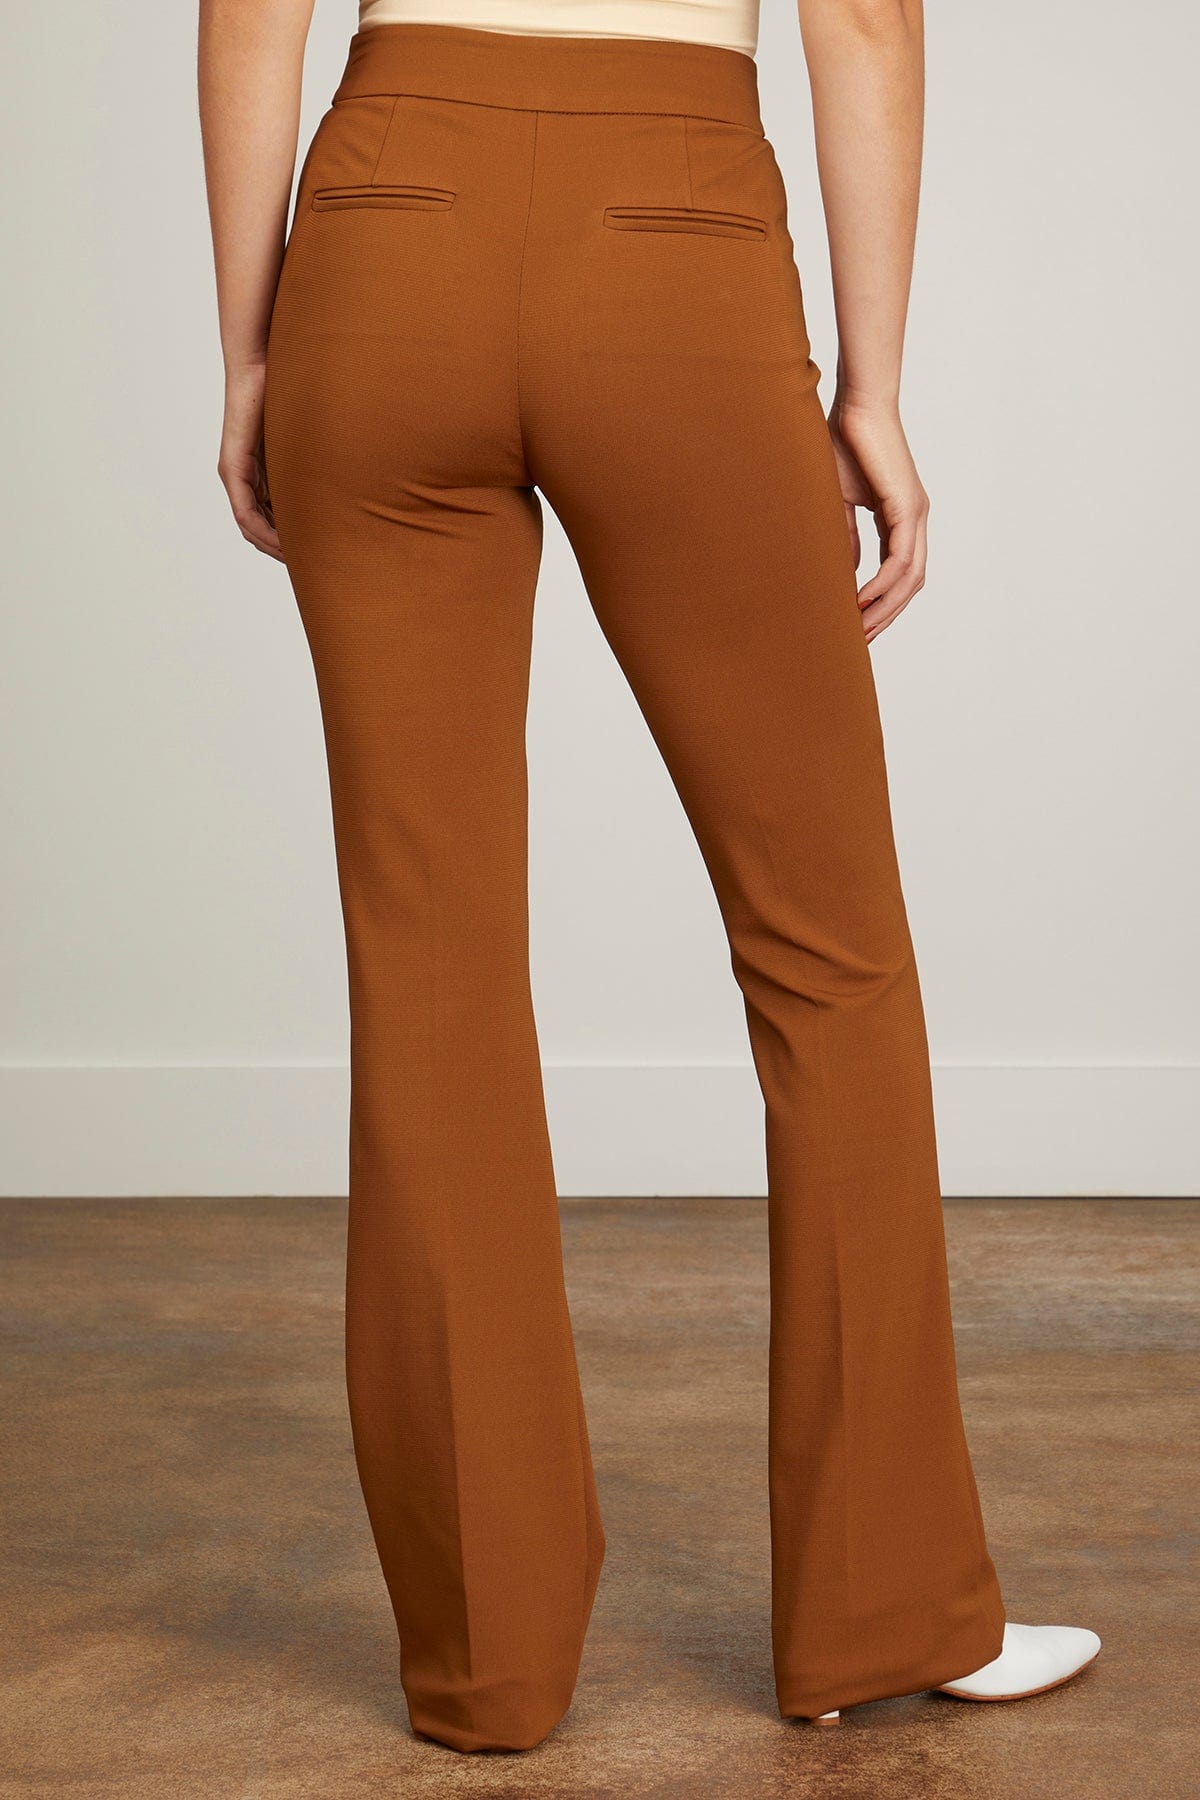 Callas Milano Unclassified Danae Stretch High Waisted Fit and Flare Trouser in Caramel Brown Callas Milano Danae Stretch High Waisted Fit and Flare Trouser in Caramel Brown